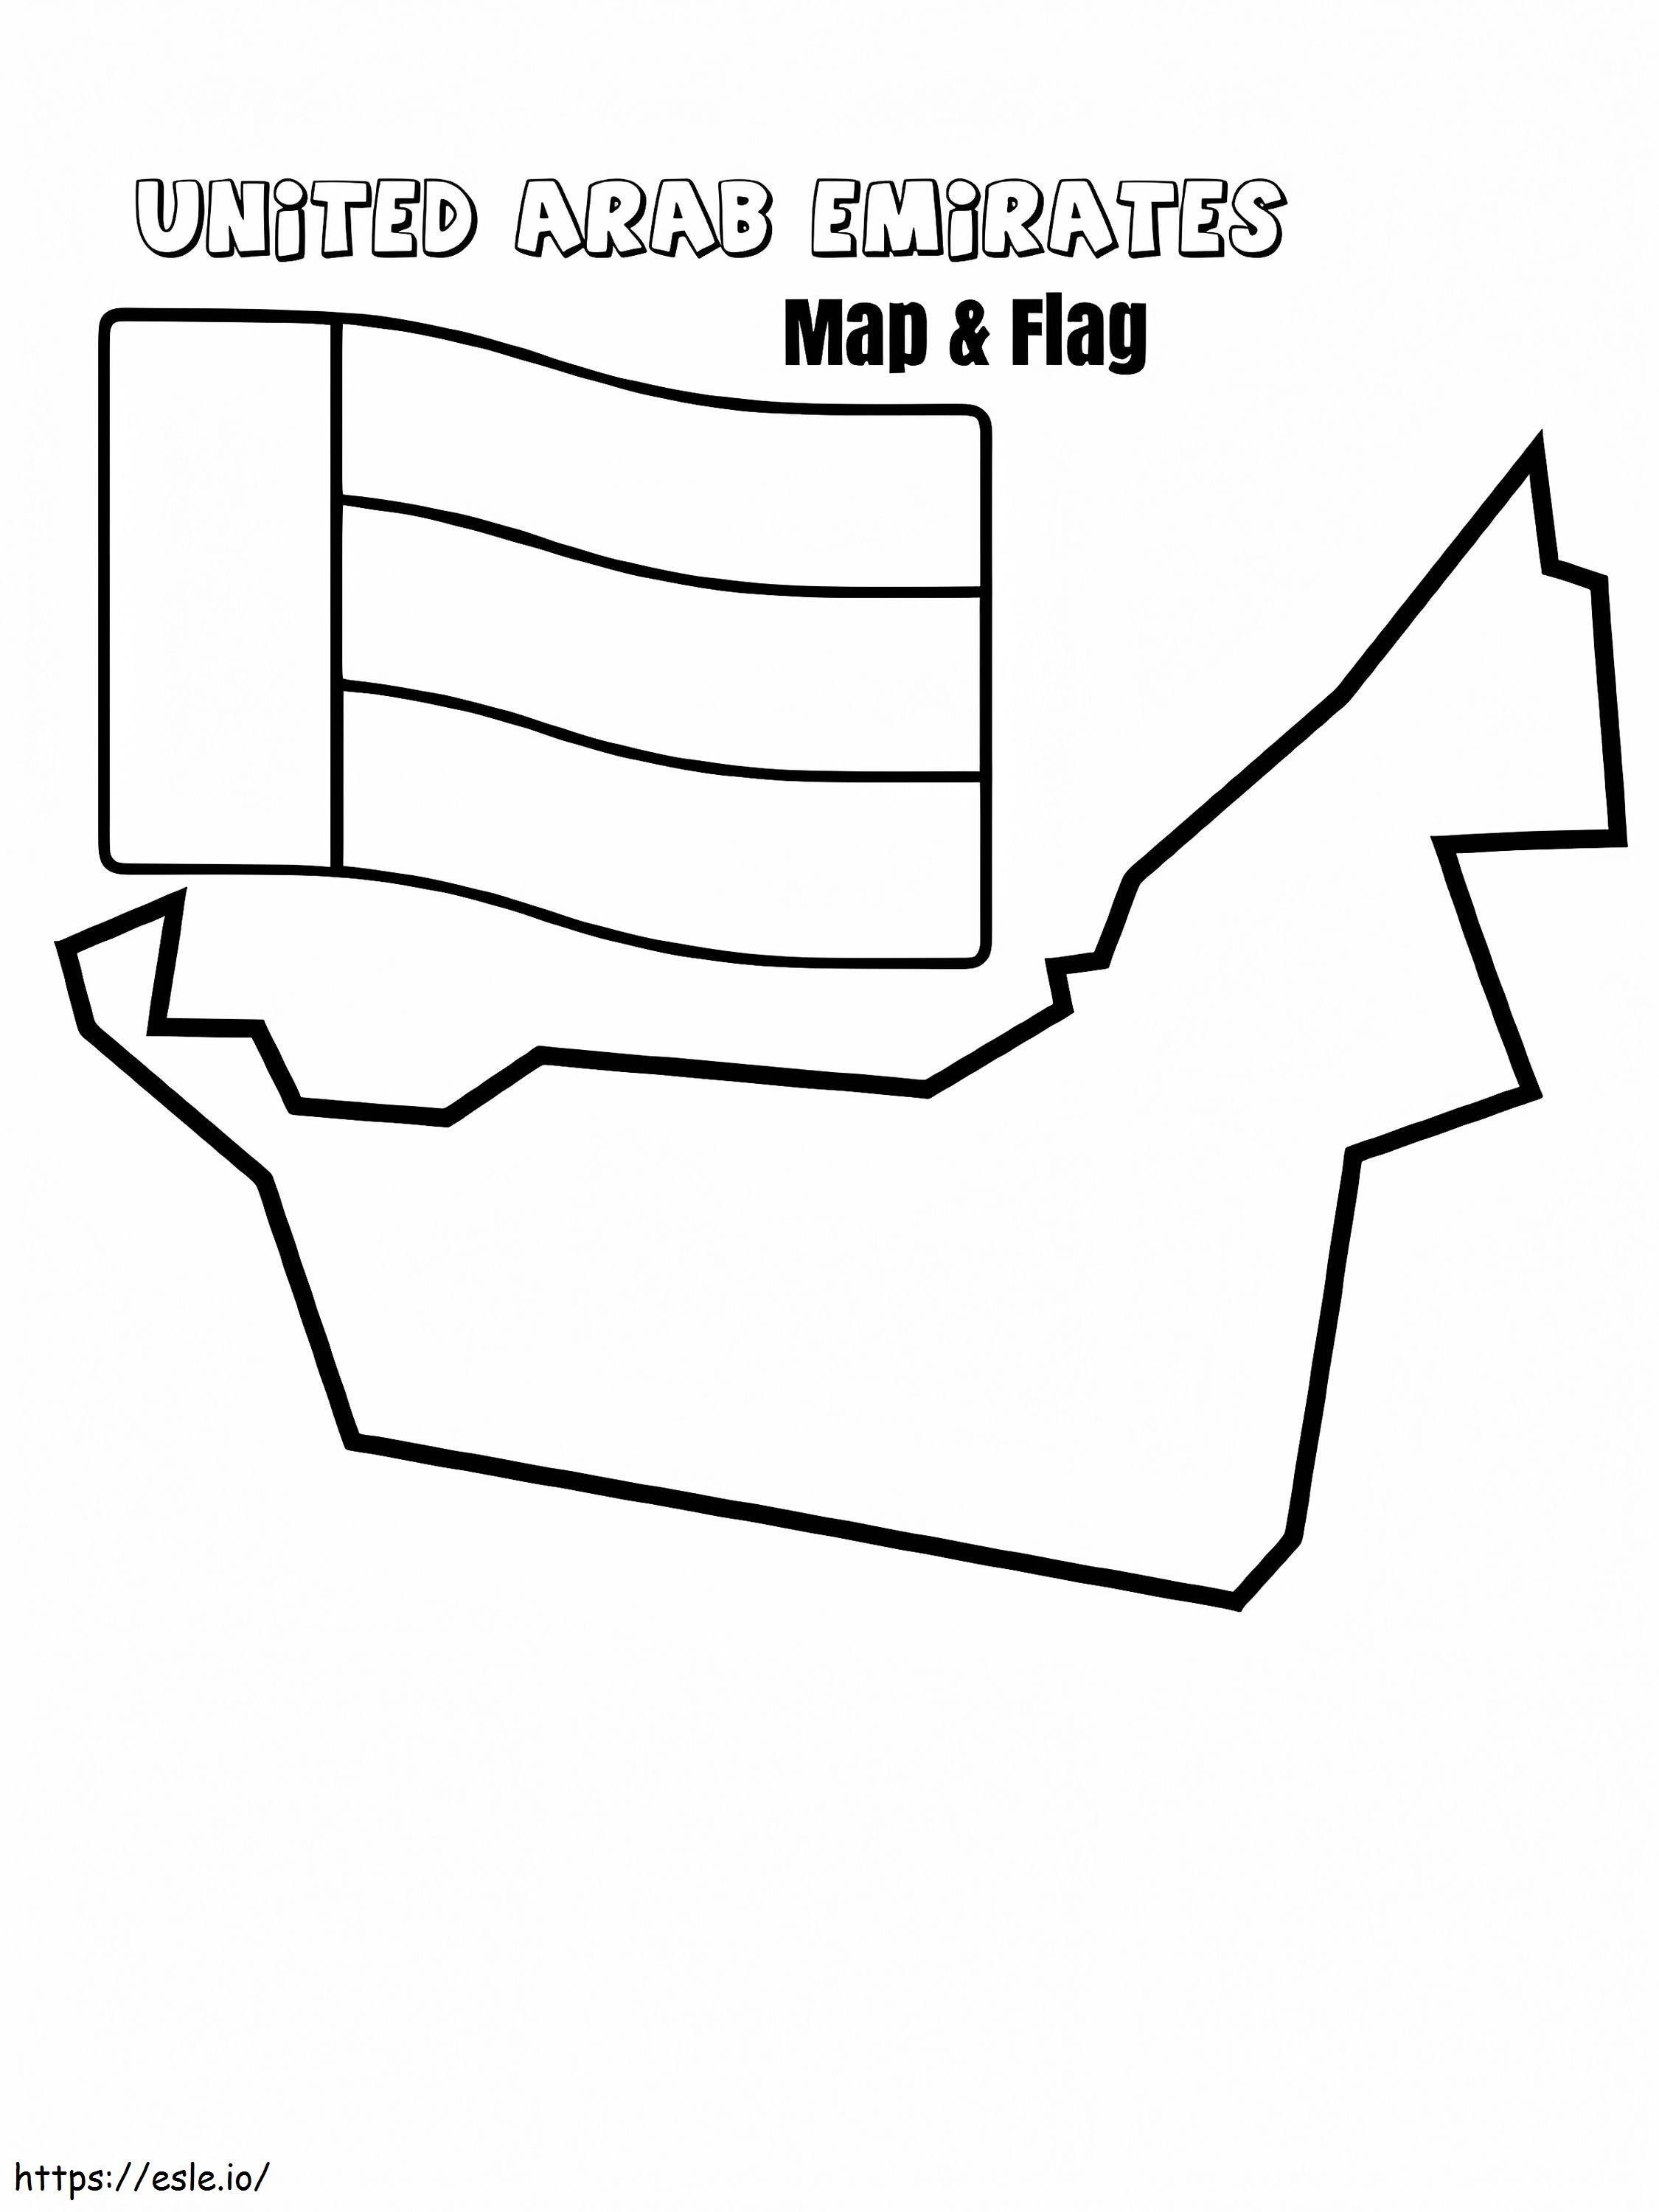 United Arab Emirates Map And Flag coloring page